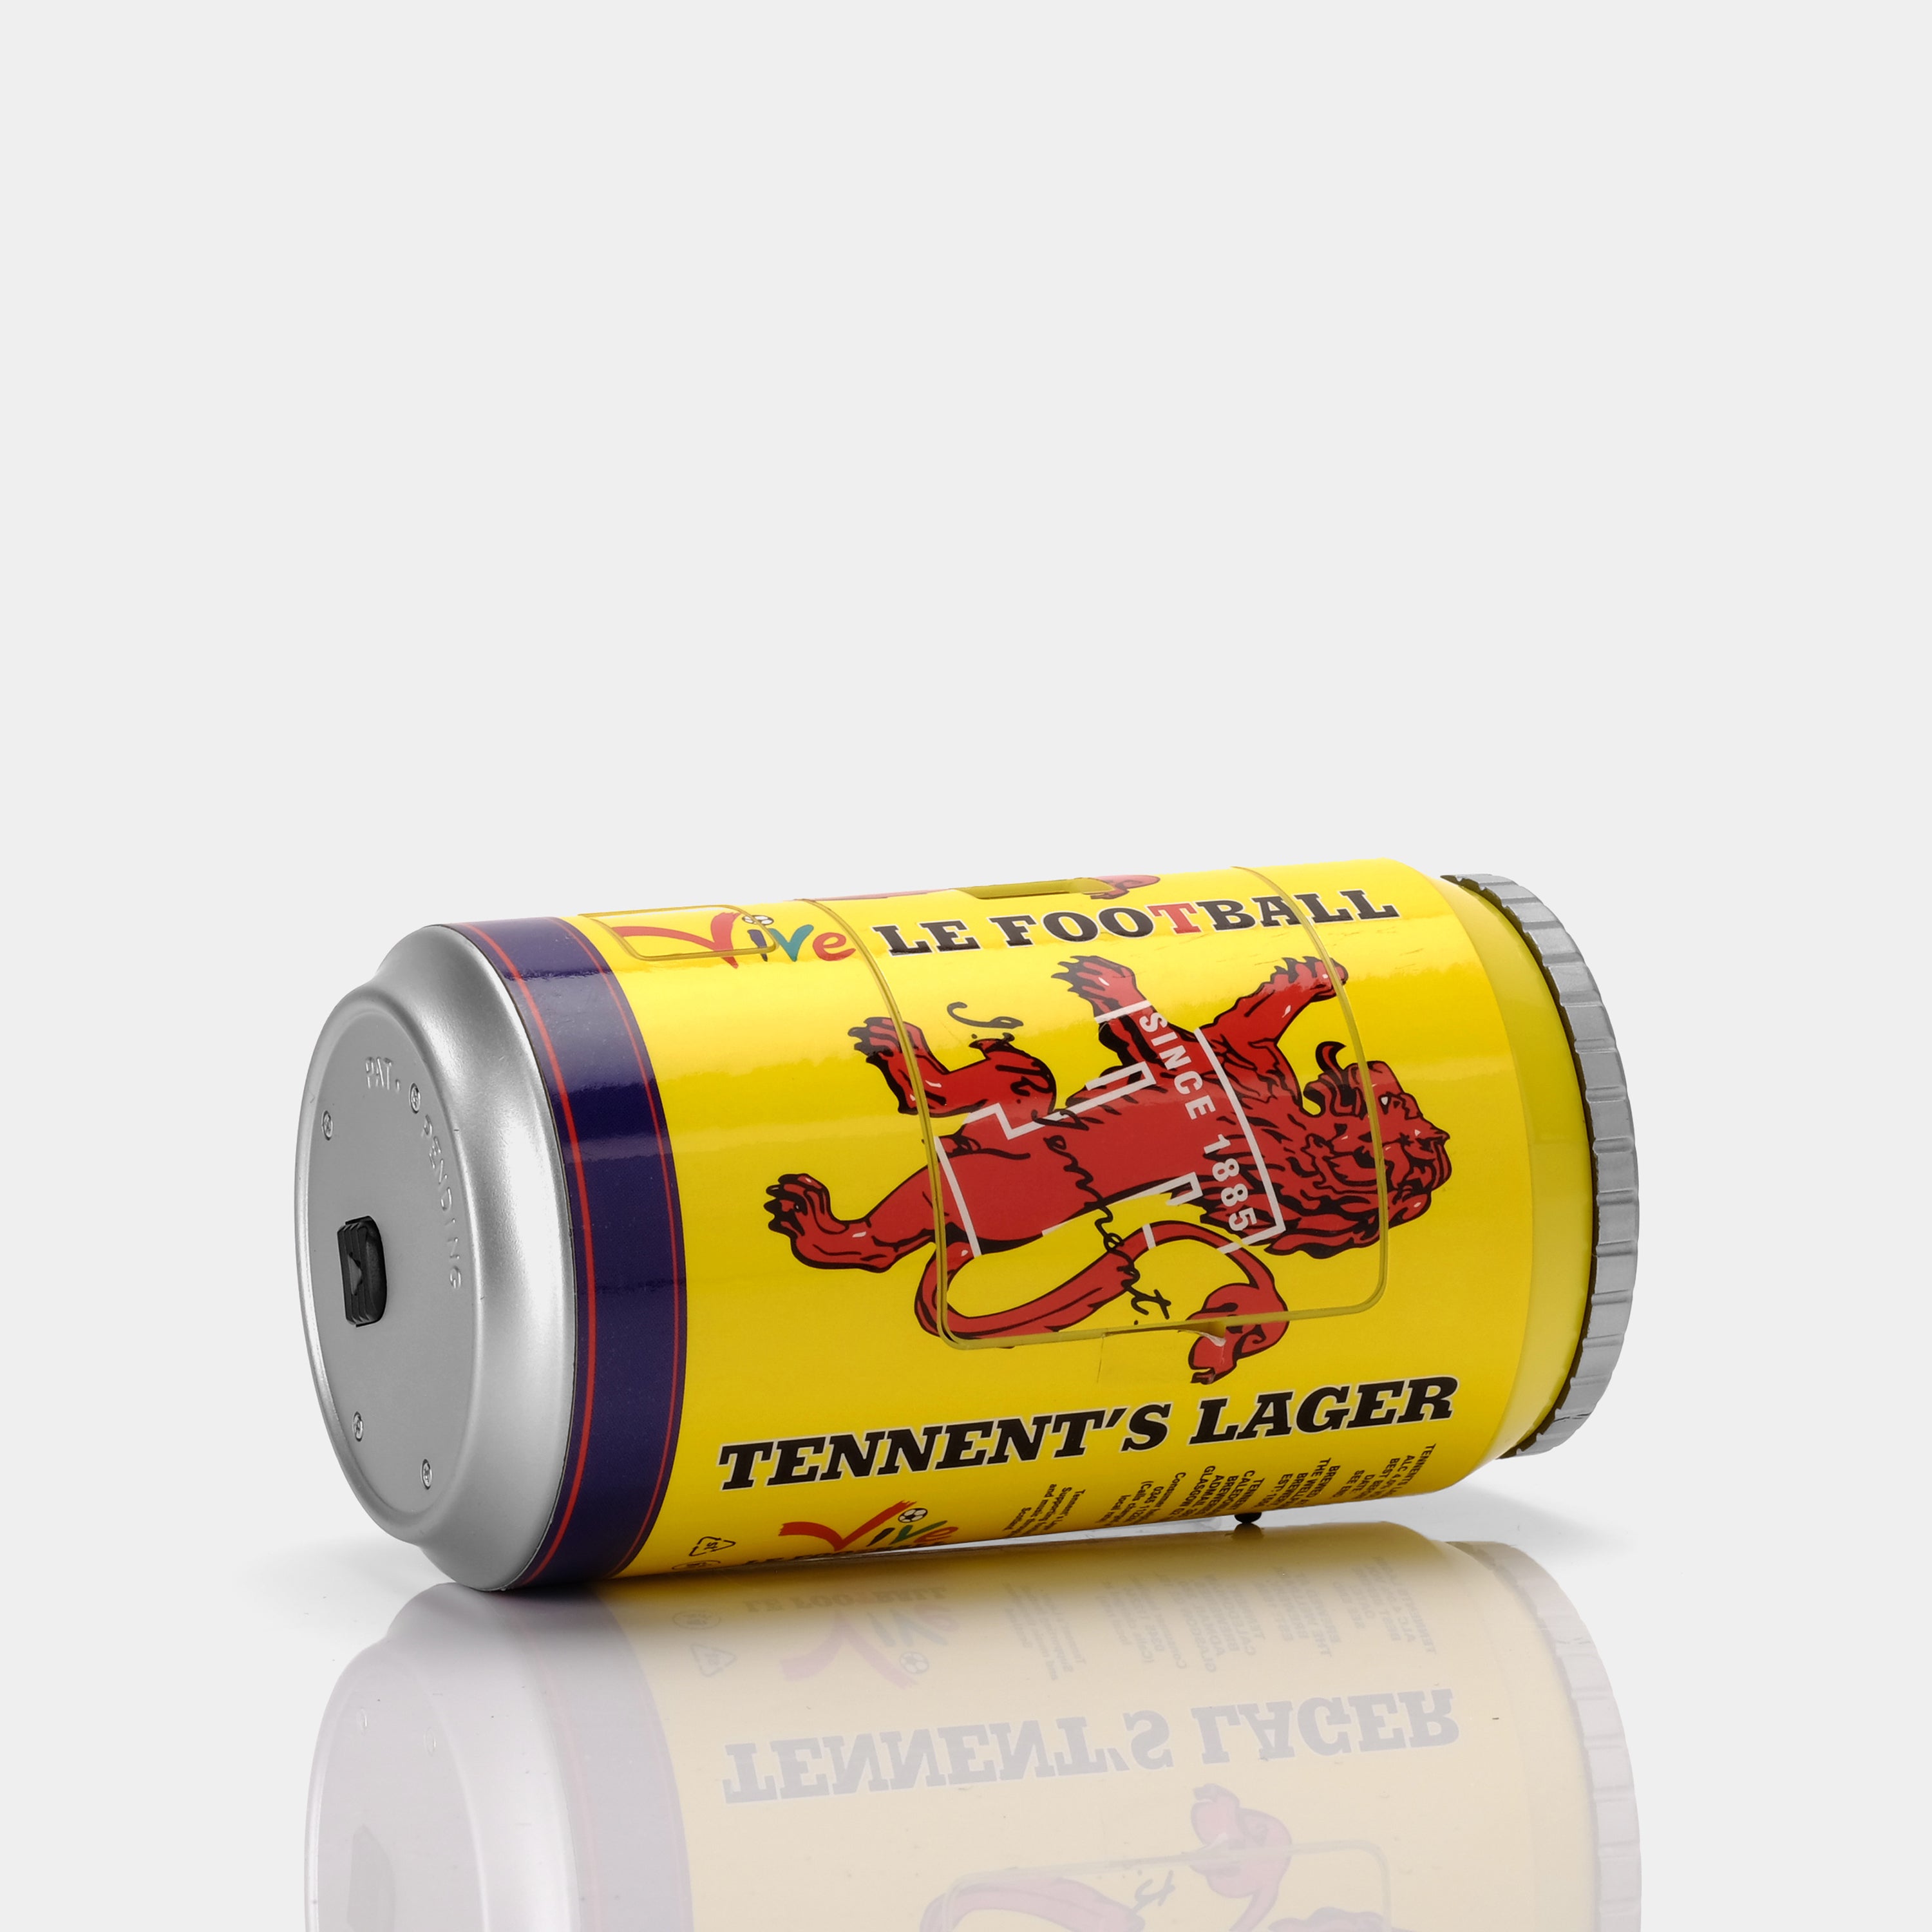 Tennent's Lager Camera In A Can "Vive Le Football" 1998 World Cup 35mm Film Camera